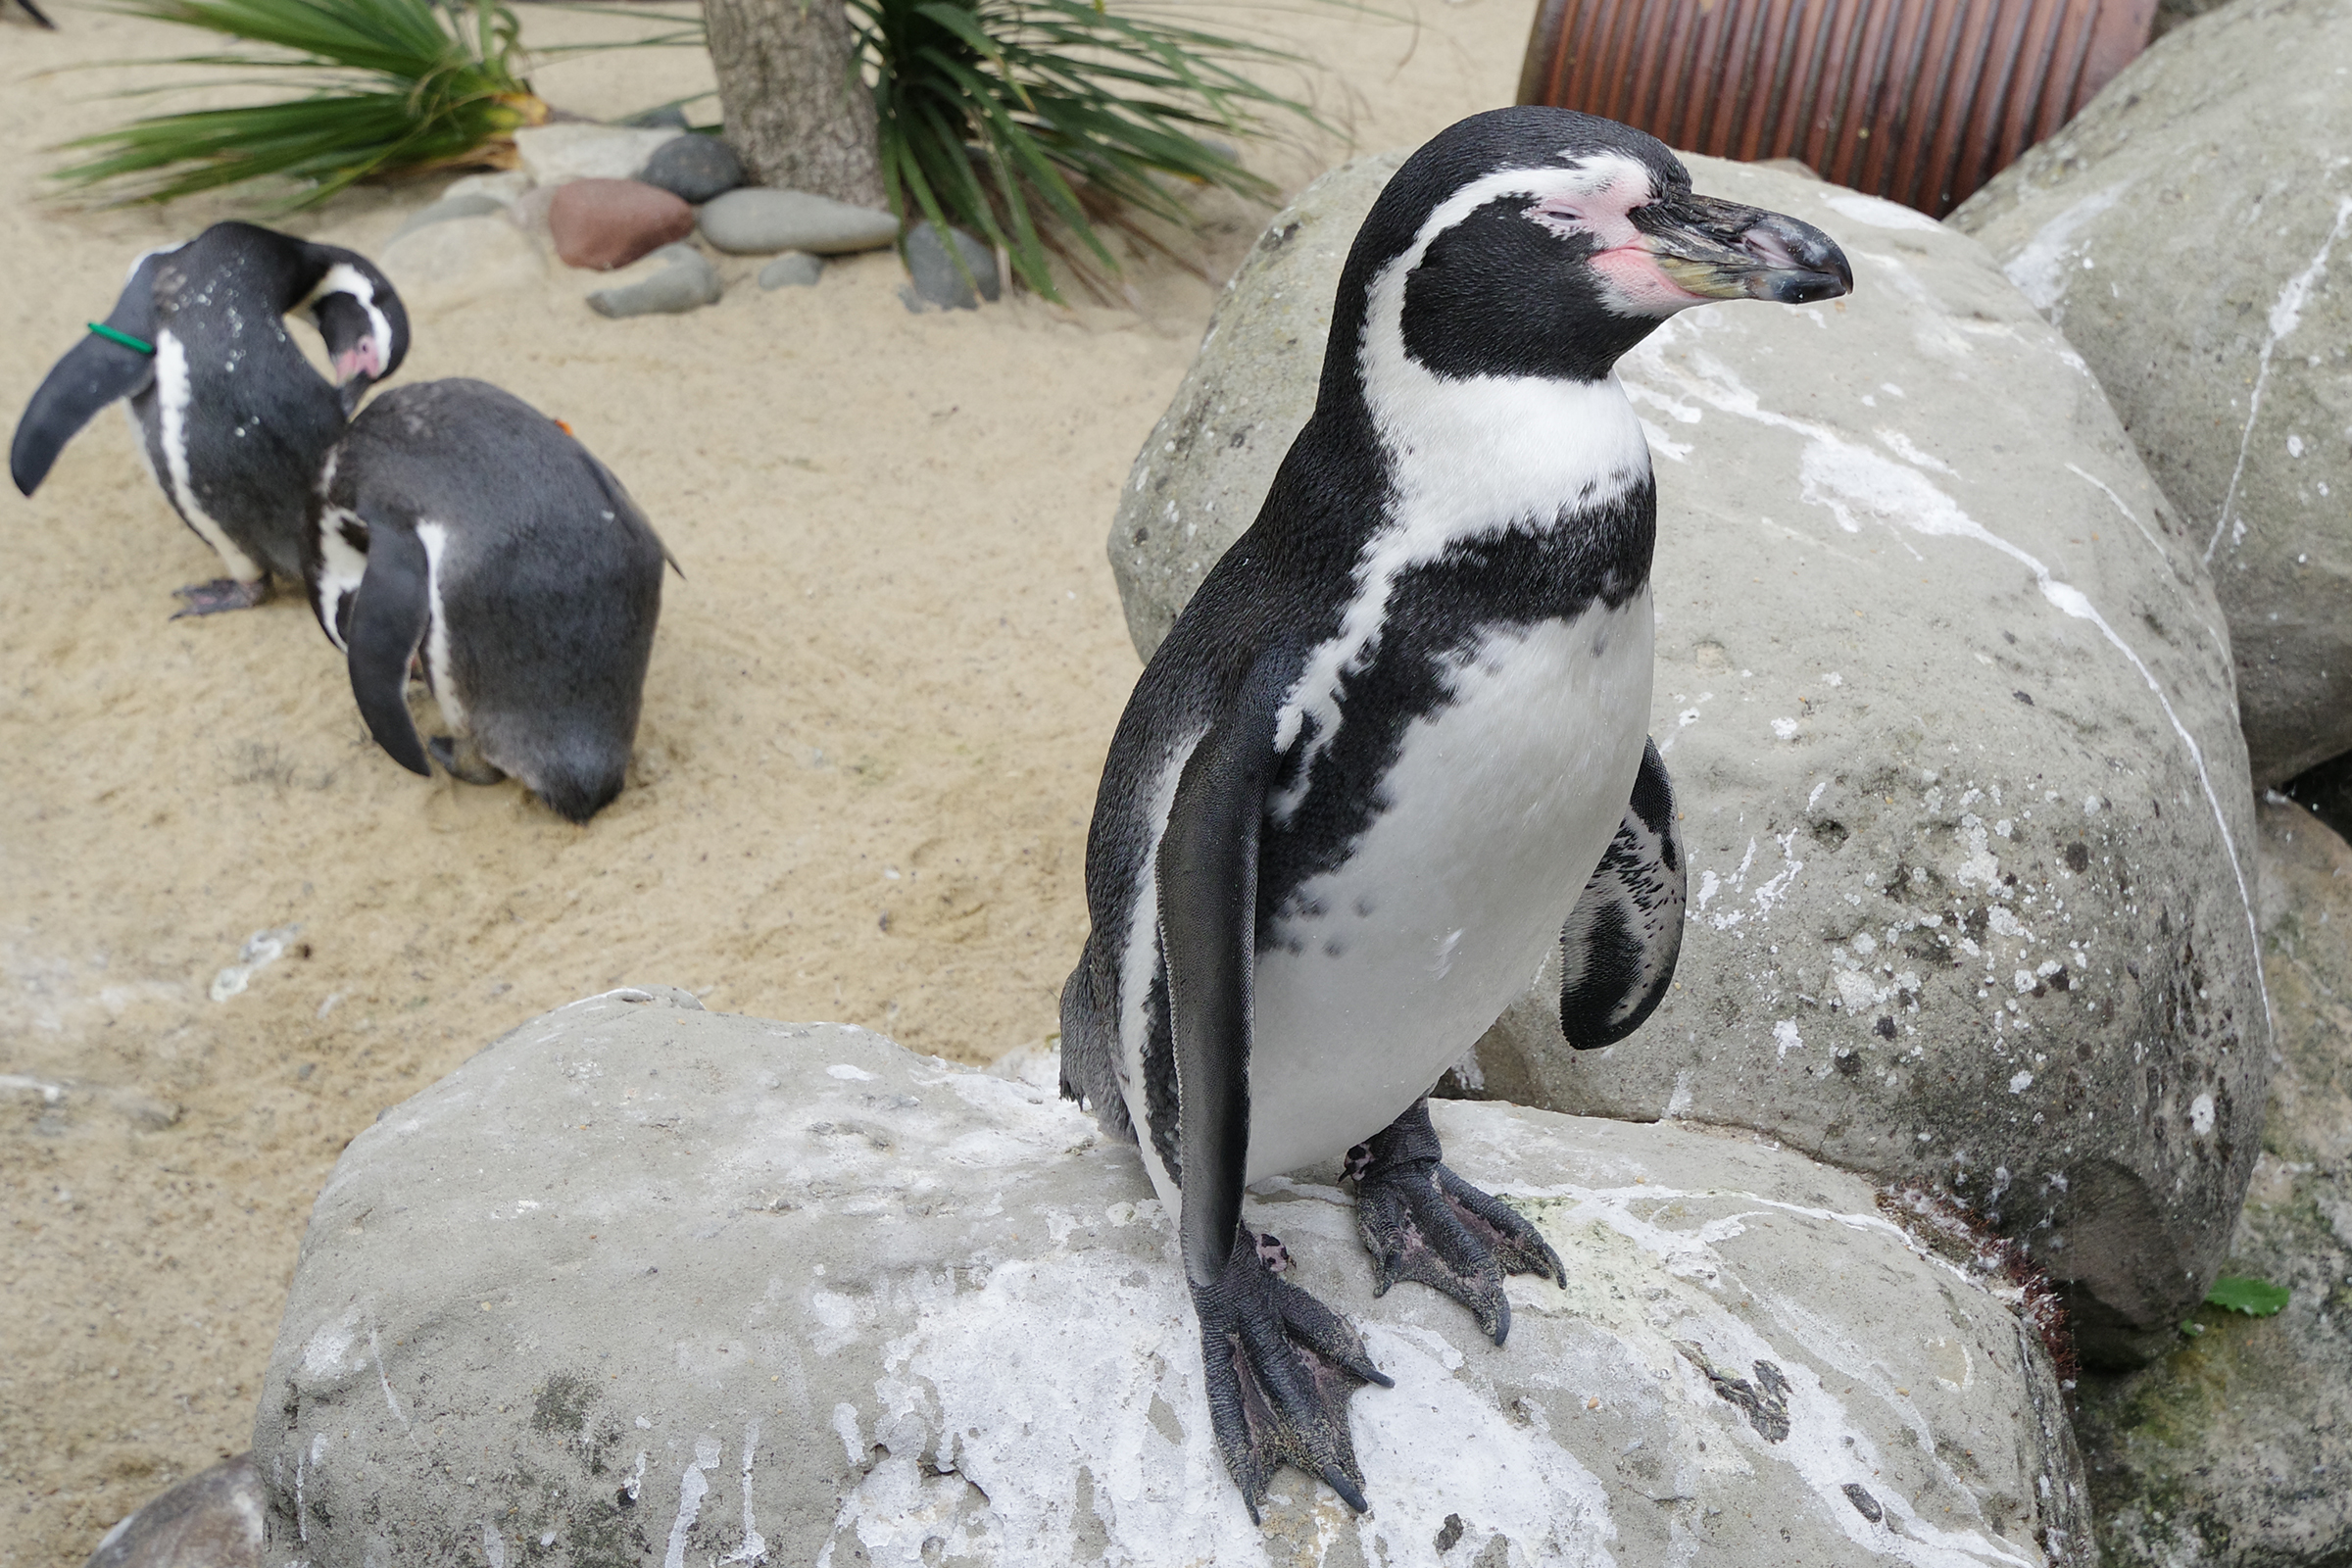 A shot of a penguin taken with the Pentax K-3 III camera, f/5, 1/1000, ISO 800